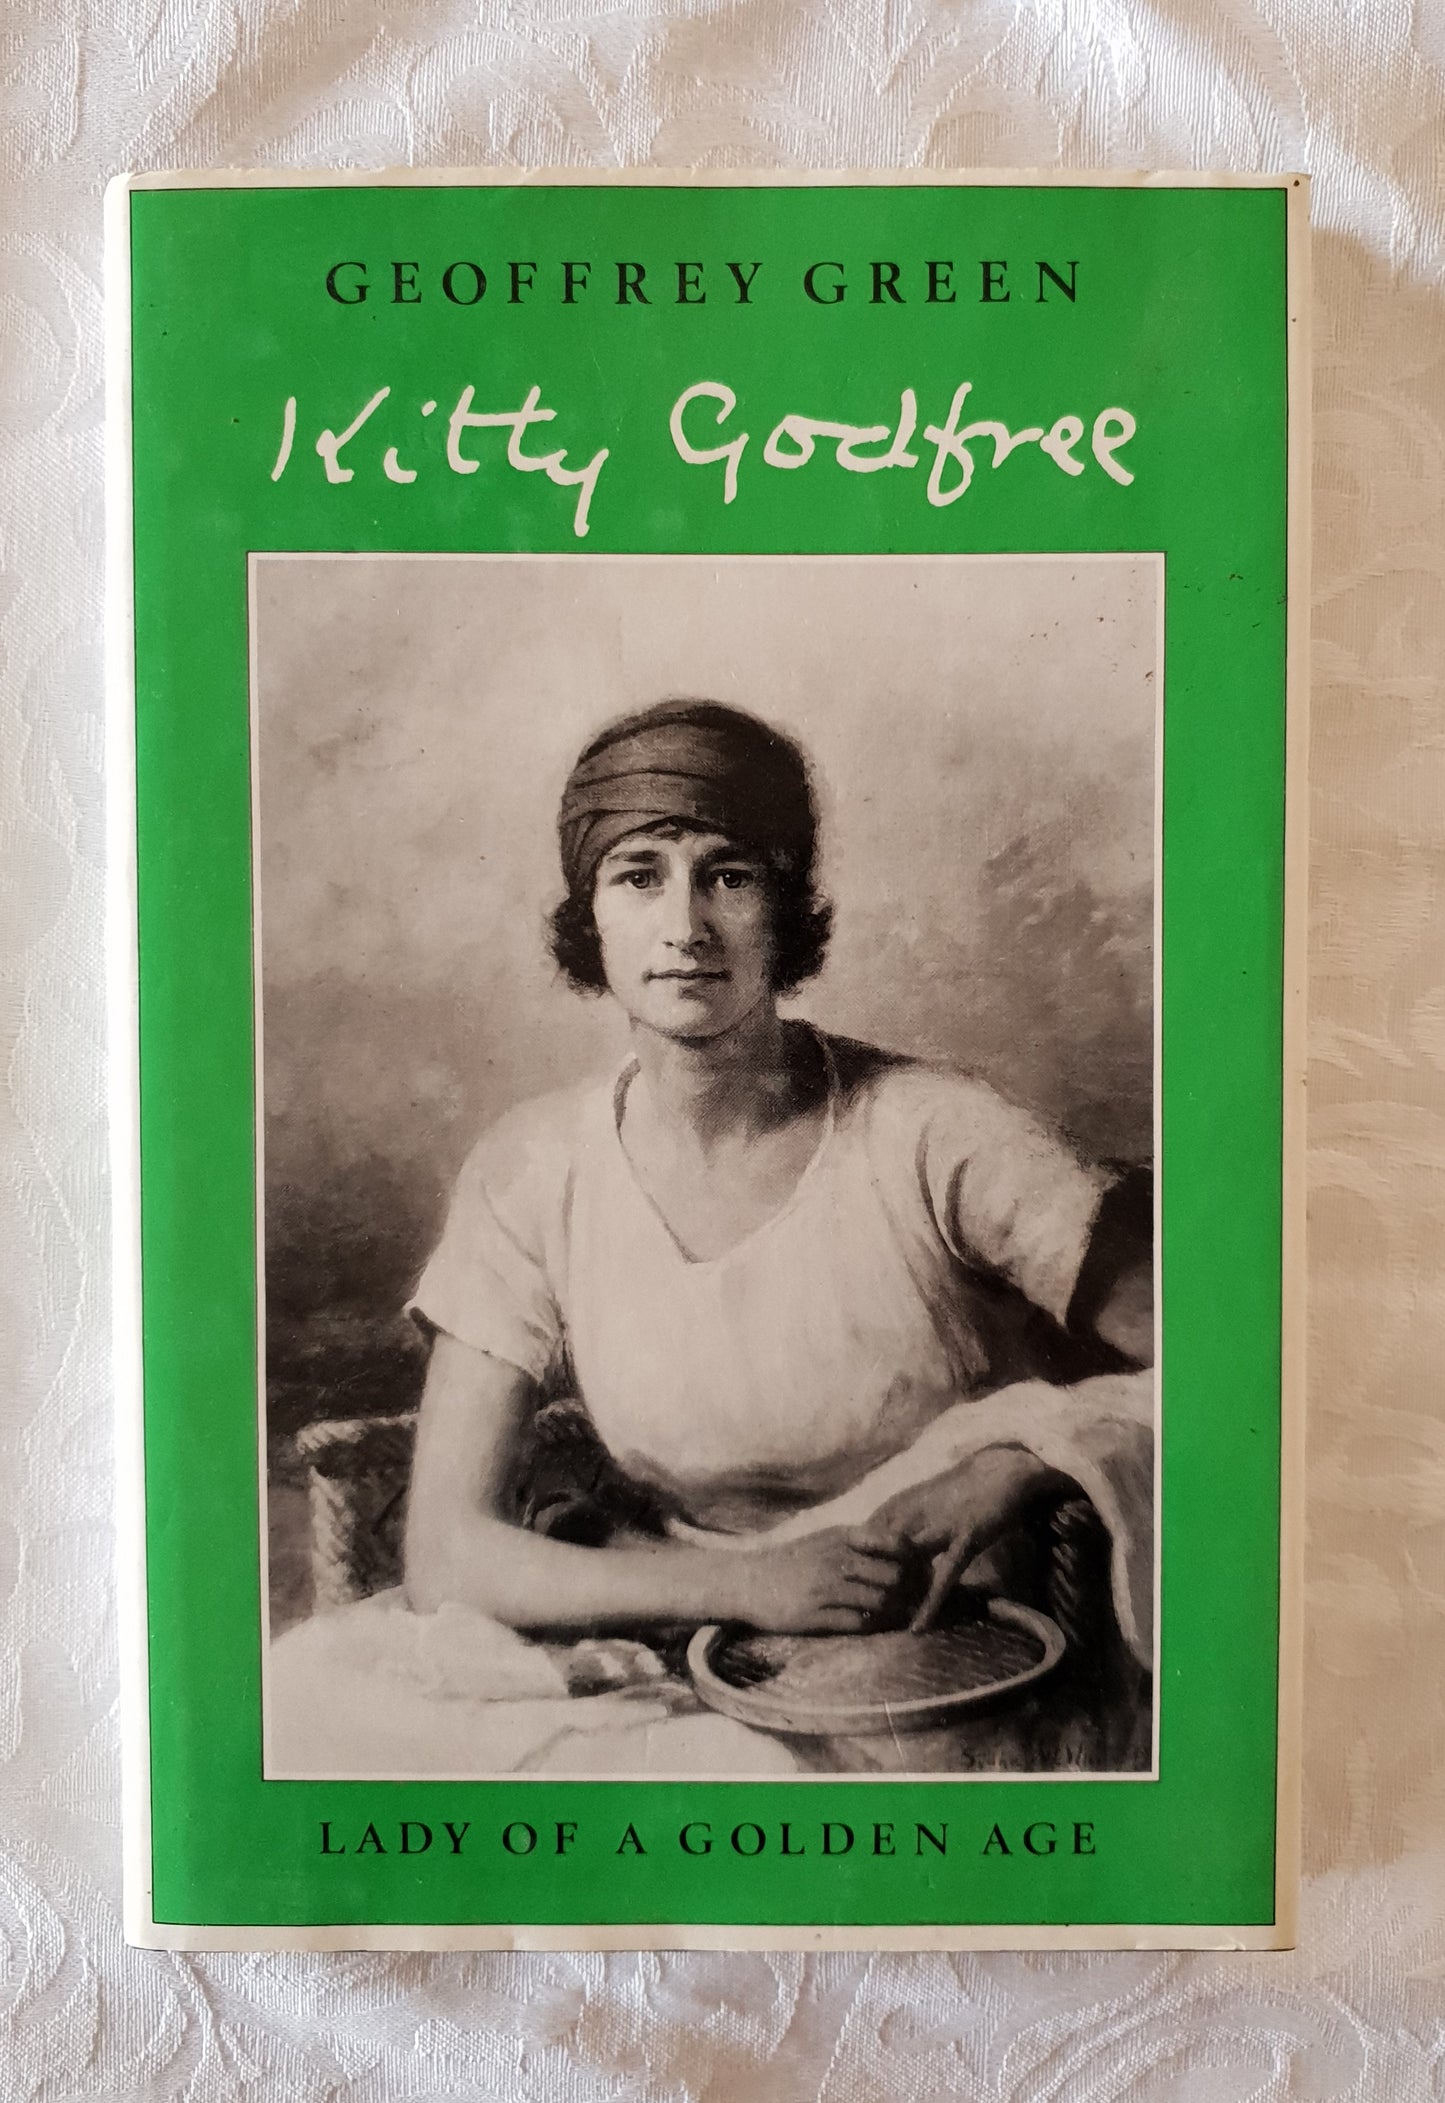 Kitty Godfree  Lady of A Golden Age  by Geoffrey Green